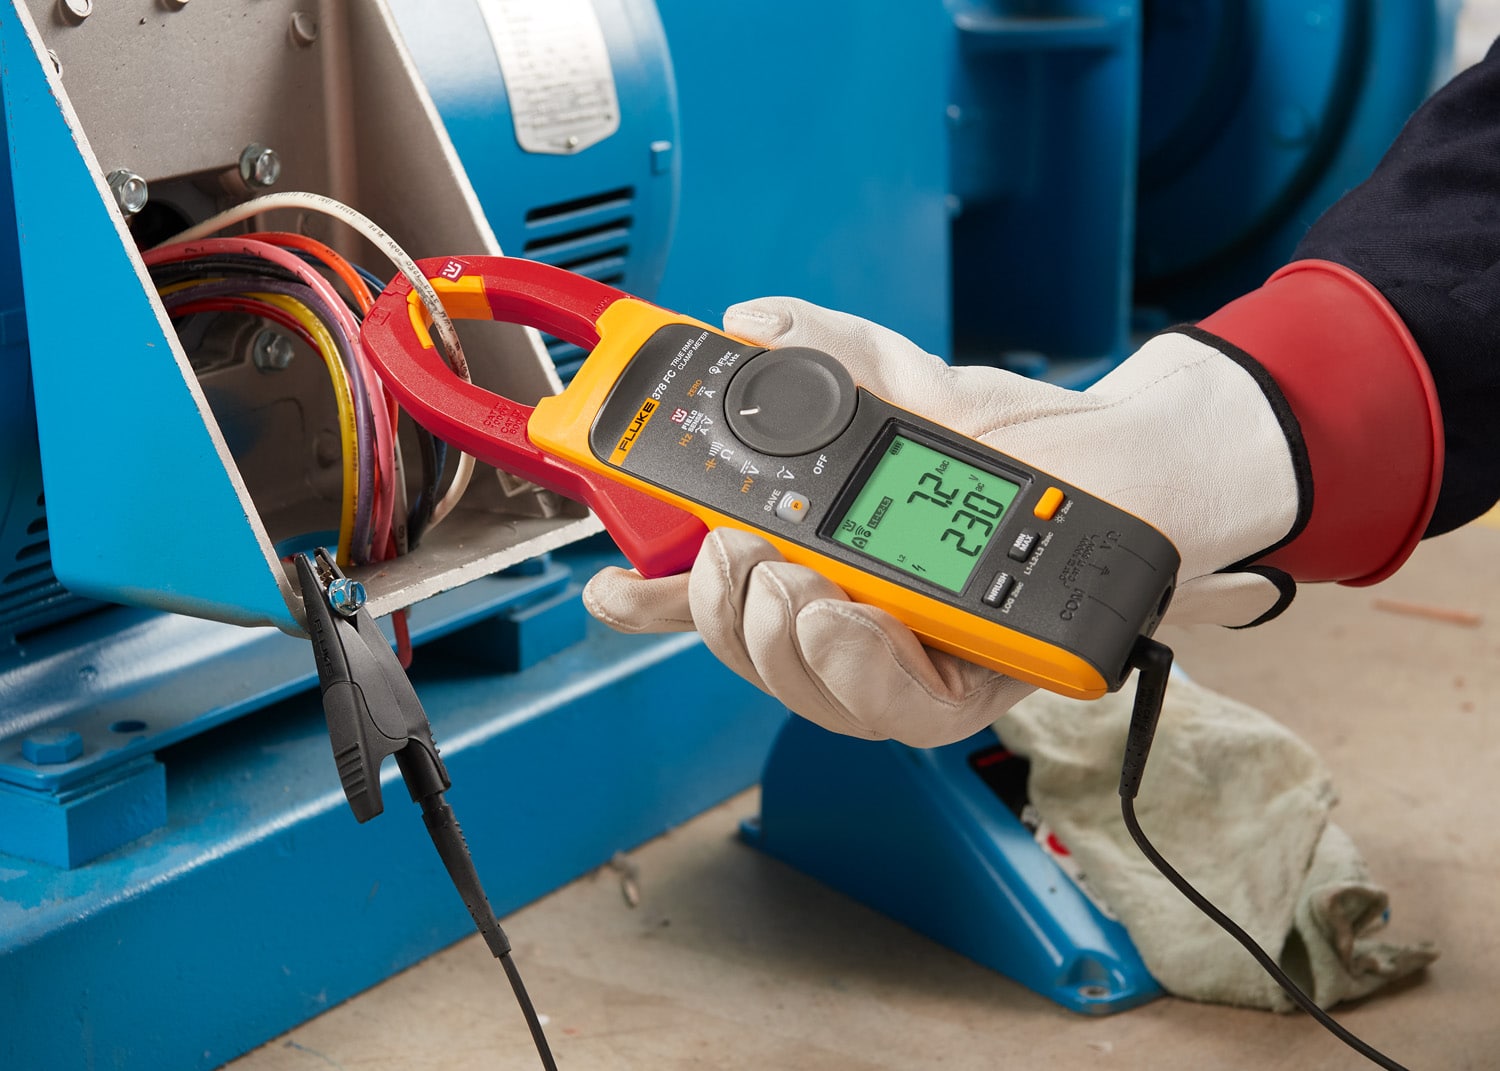 How to Measure Current with a Clamp Meter